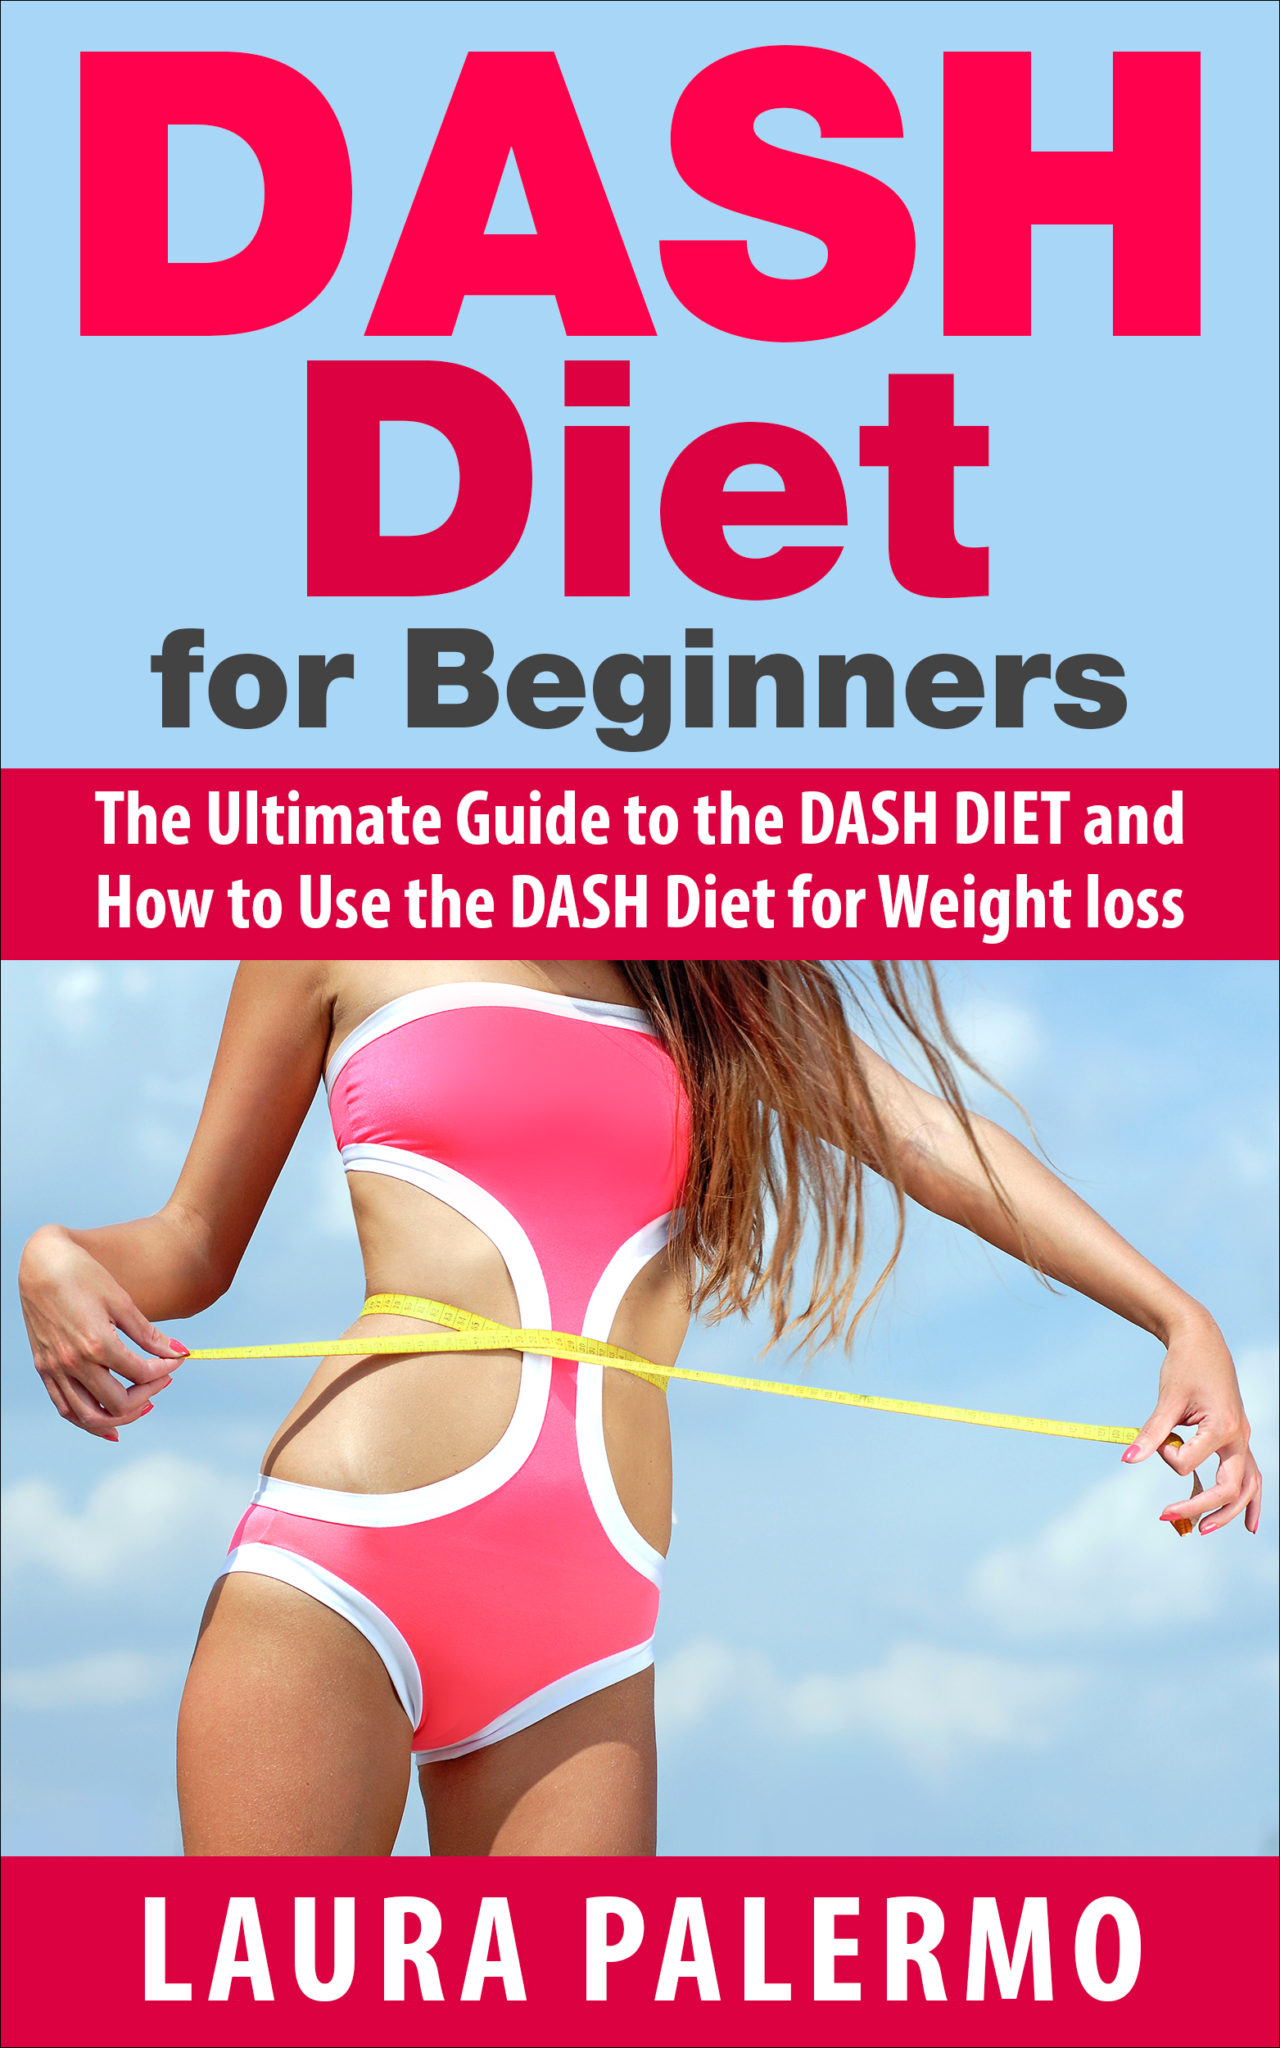 FREE: DASH Diet for Beginners: The Ultimate Guide to the DASH DIET and How to Use the DASH Diet for Weight loss by Laura Palermo